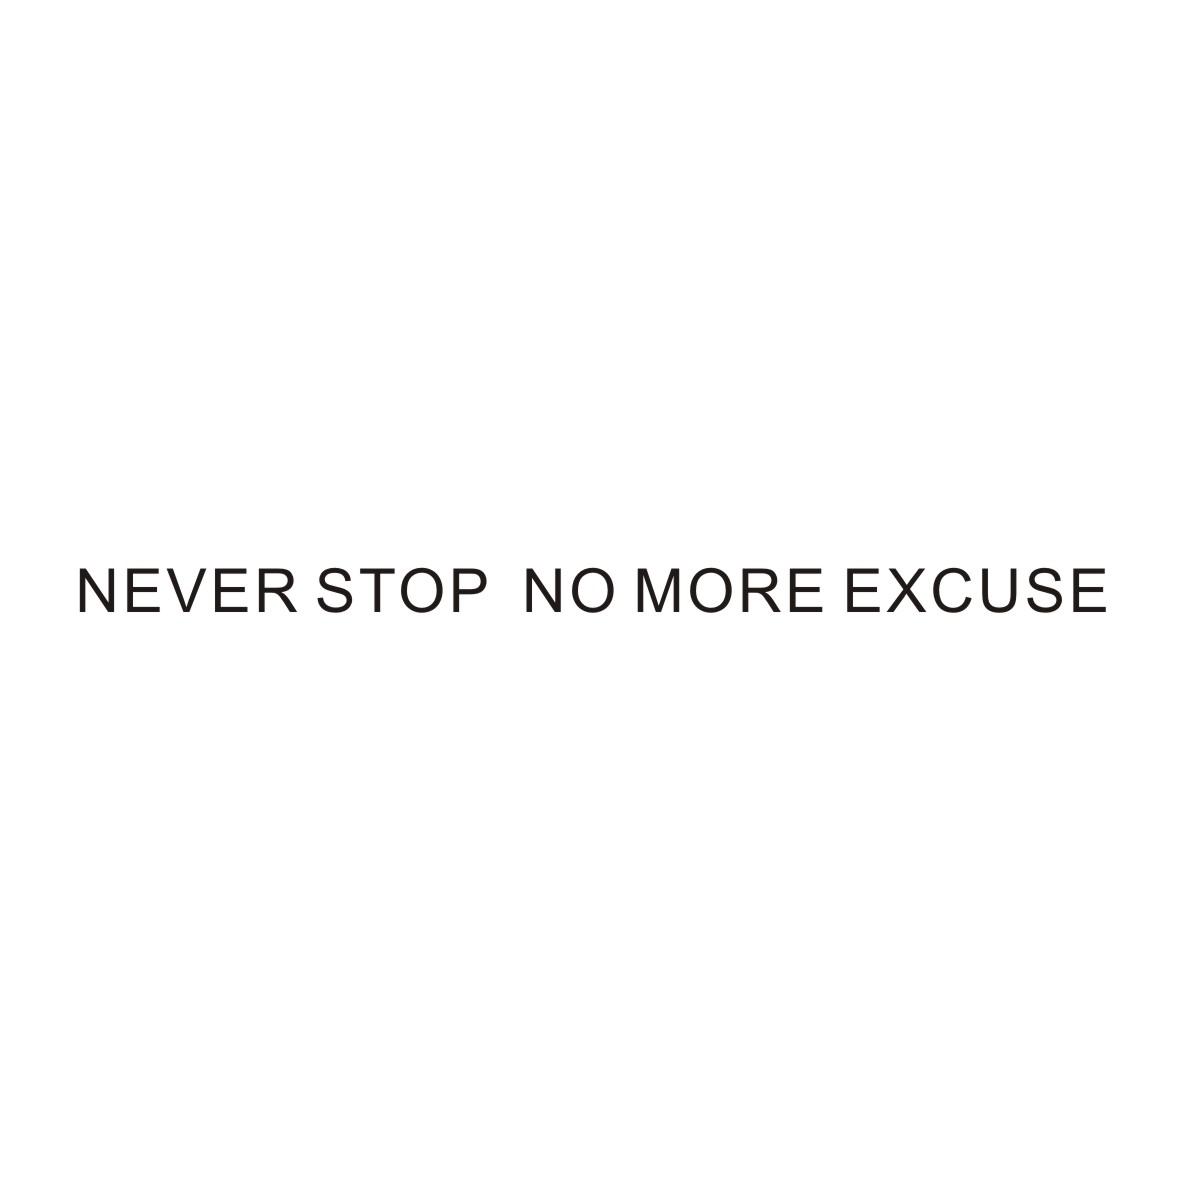 never stop no more excuse 商标公告